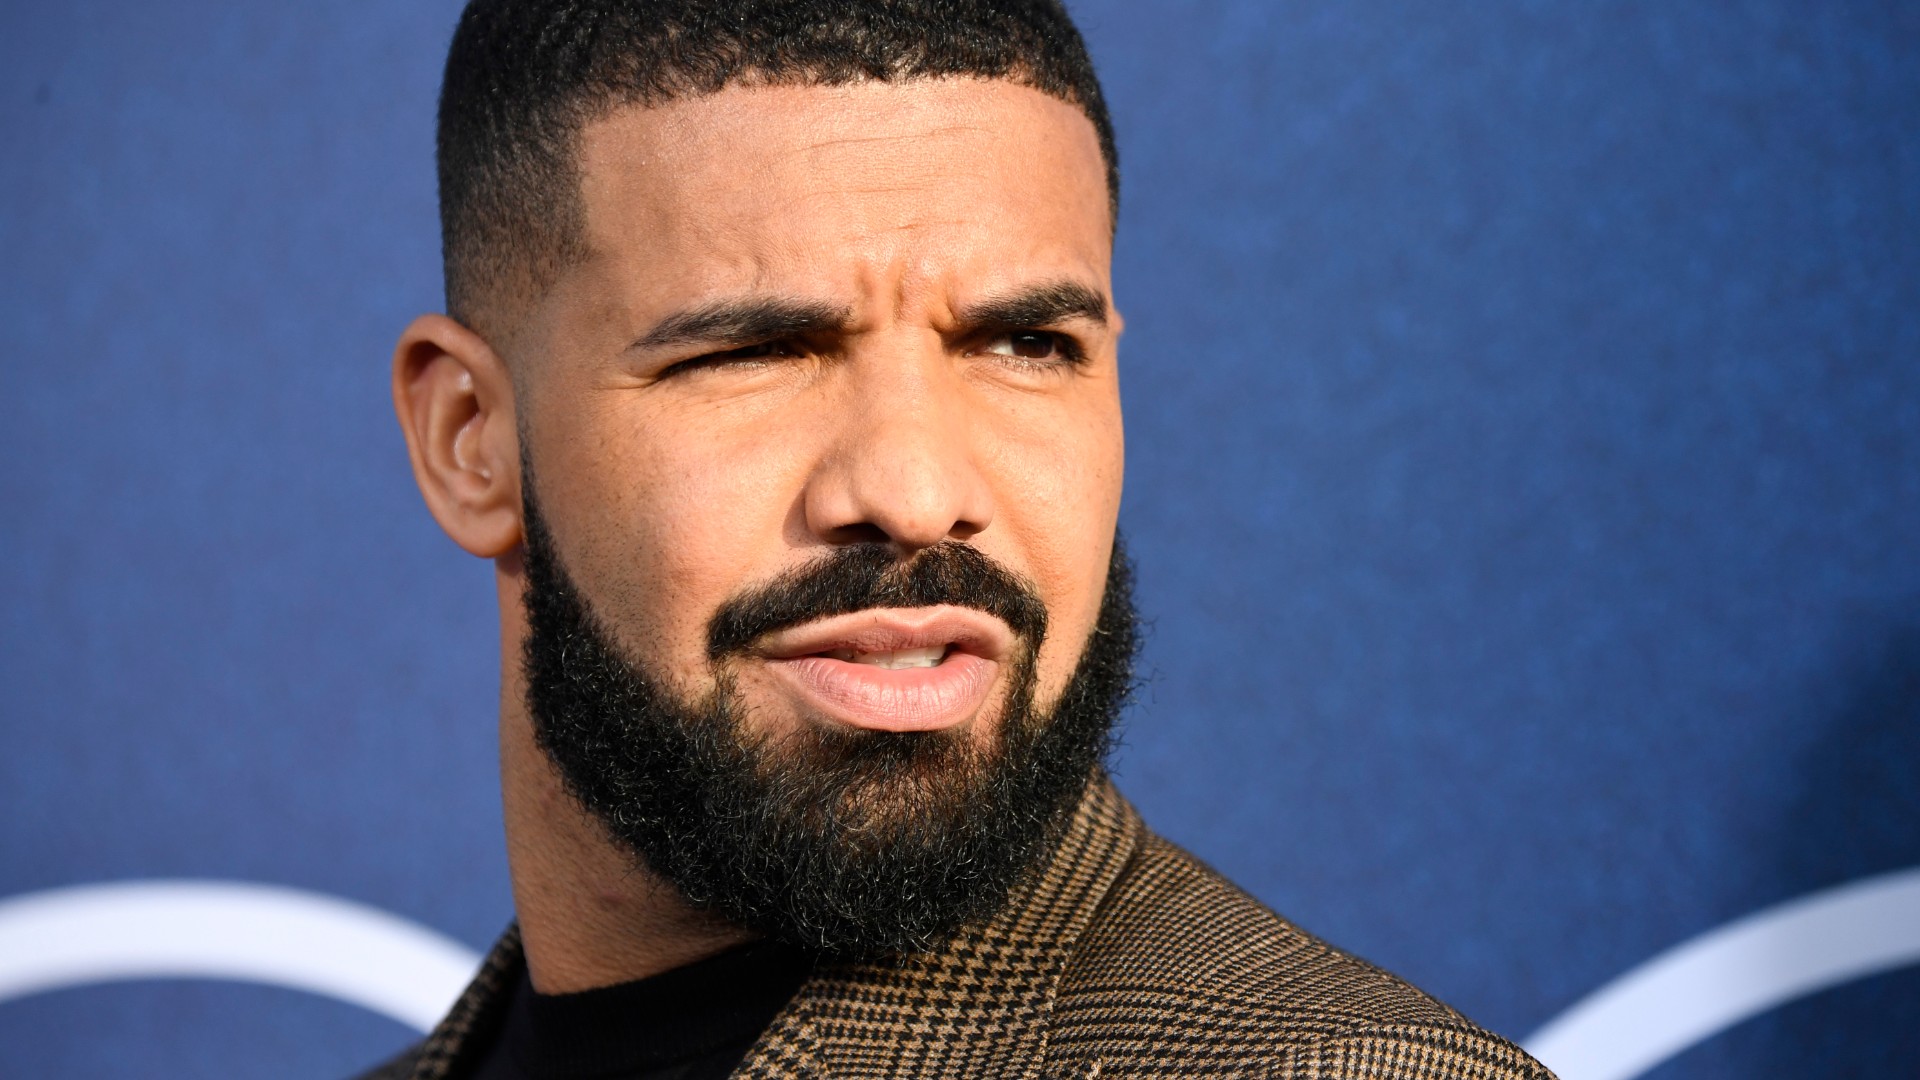 Drake faces backlash for dissing Moroccan women photo